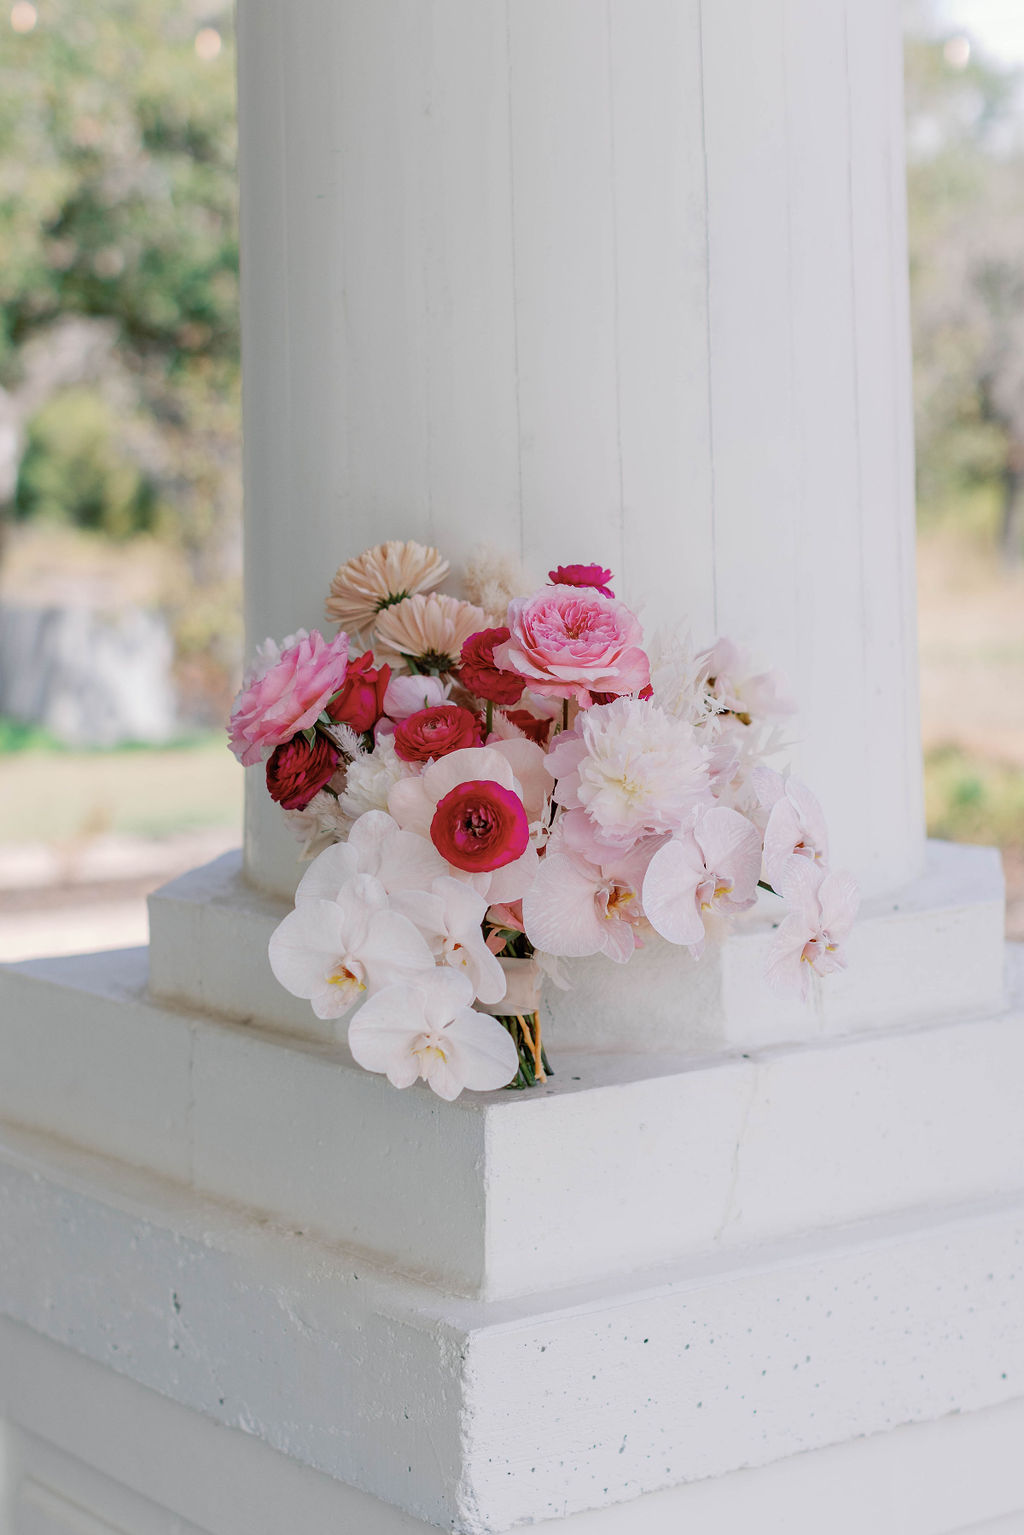 The wedding bouquet leans up against a pillar at The Grand Lady Wedding Venue in Austin Texas. It is made of hues of pink flowers. | Photo by Texas Wedding Photographer Sarah Block of Sarah Block Photography